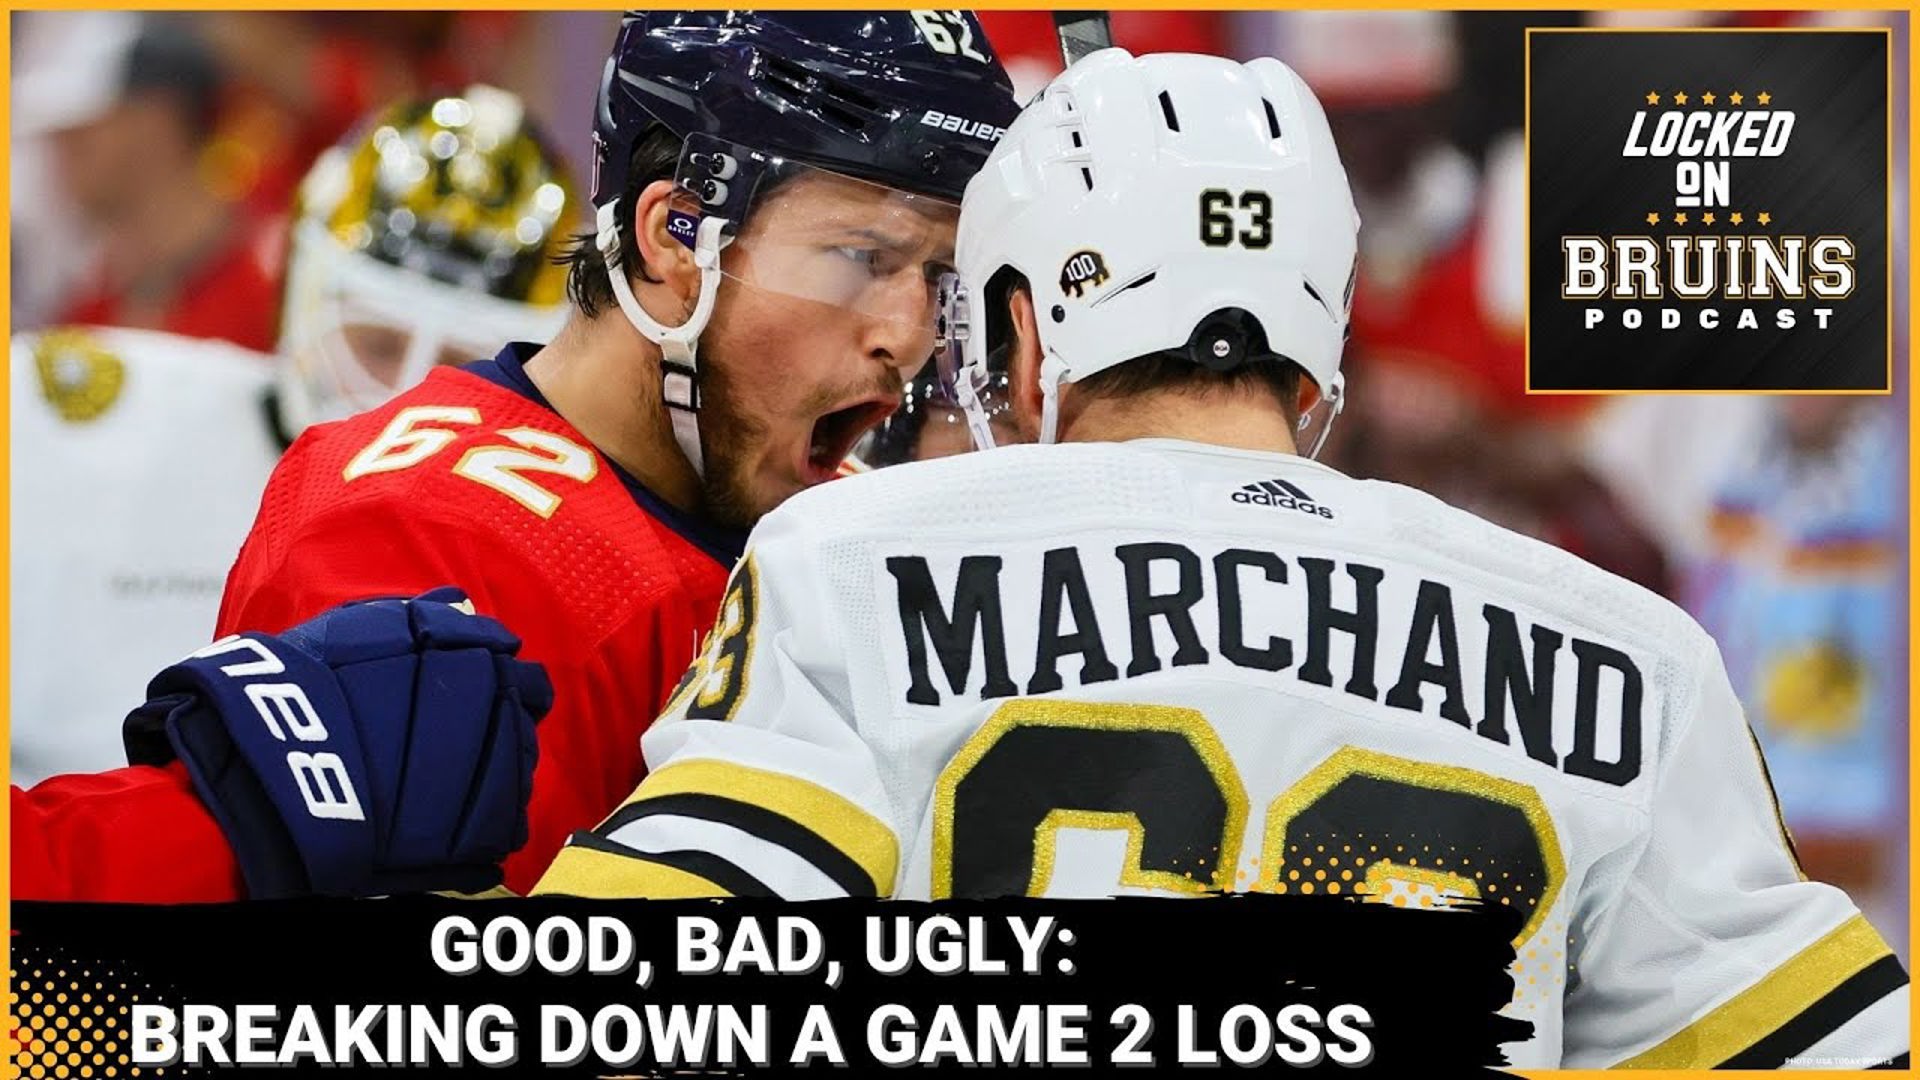 The Good, Bad, Ugly from the Boston Bruins Game 2 Loss to the Florida Panthers